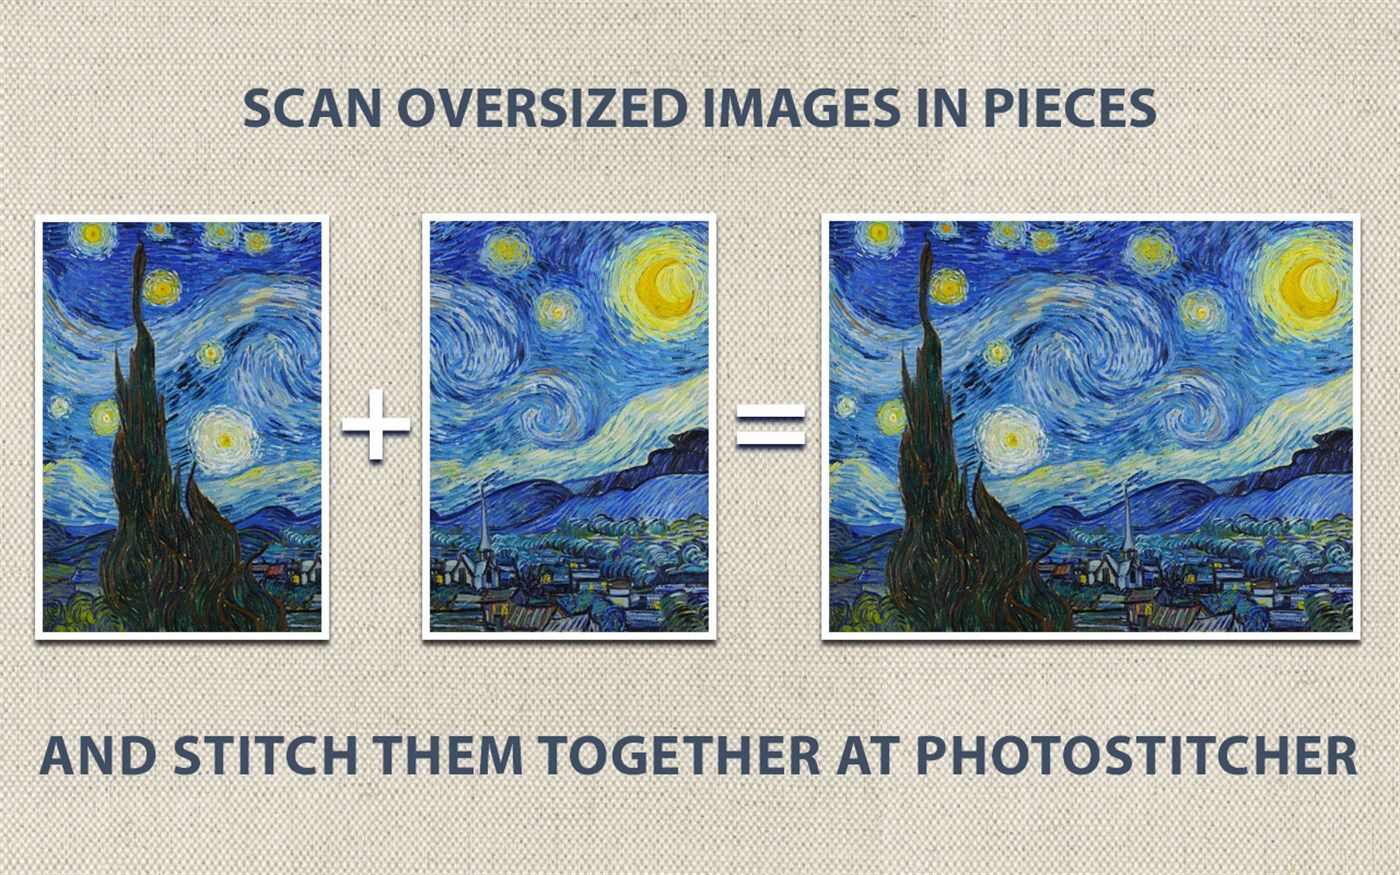 Scan Oversized Images in Pieces and Stitch them Together Using PhotoStitcher